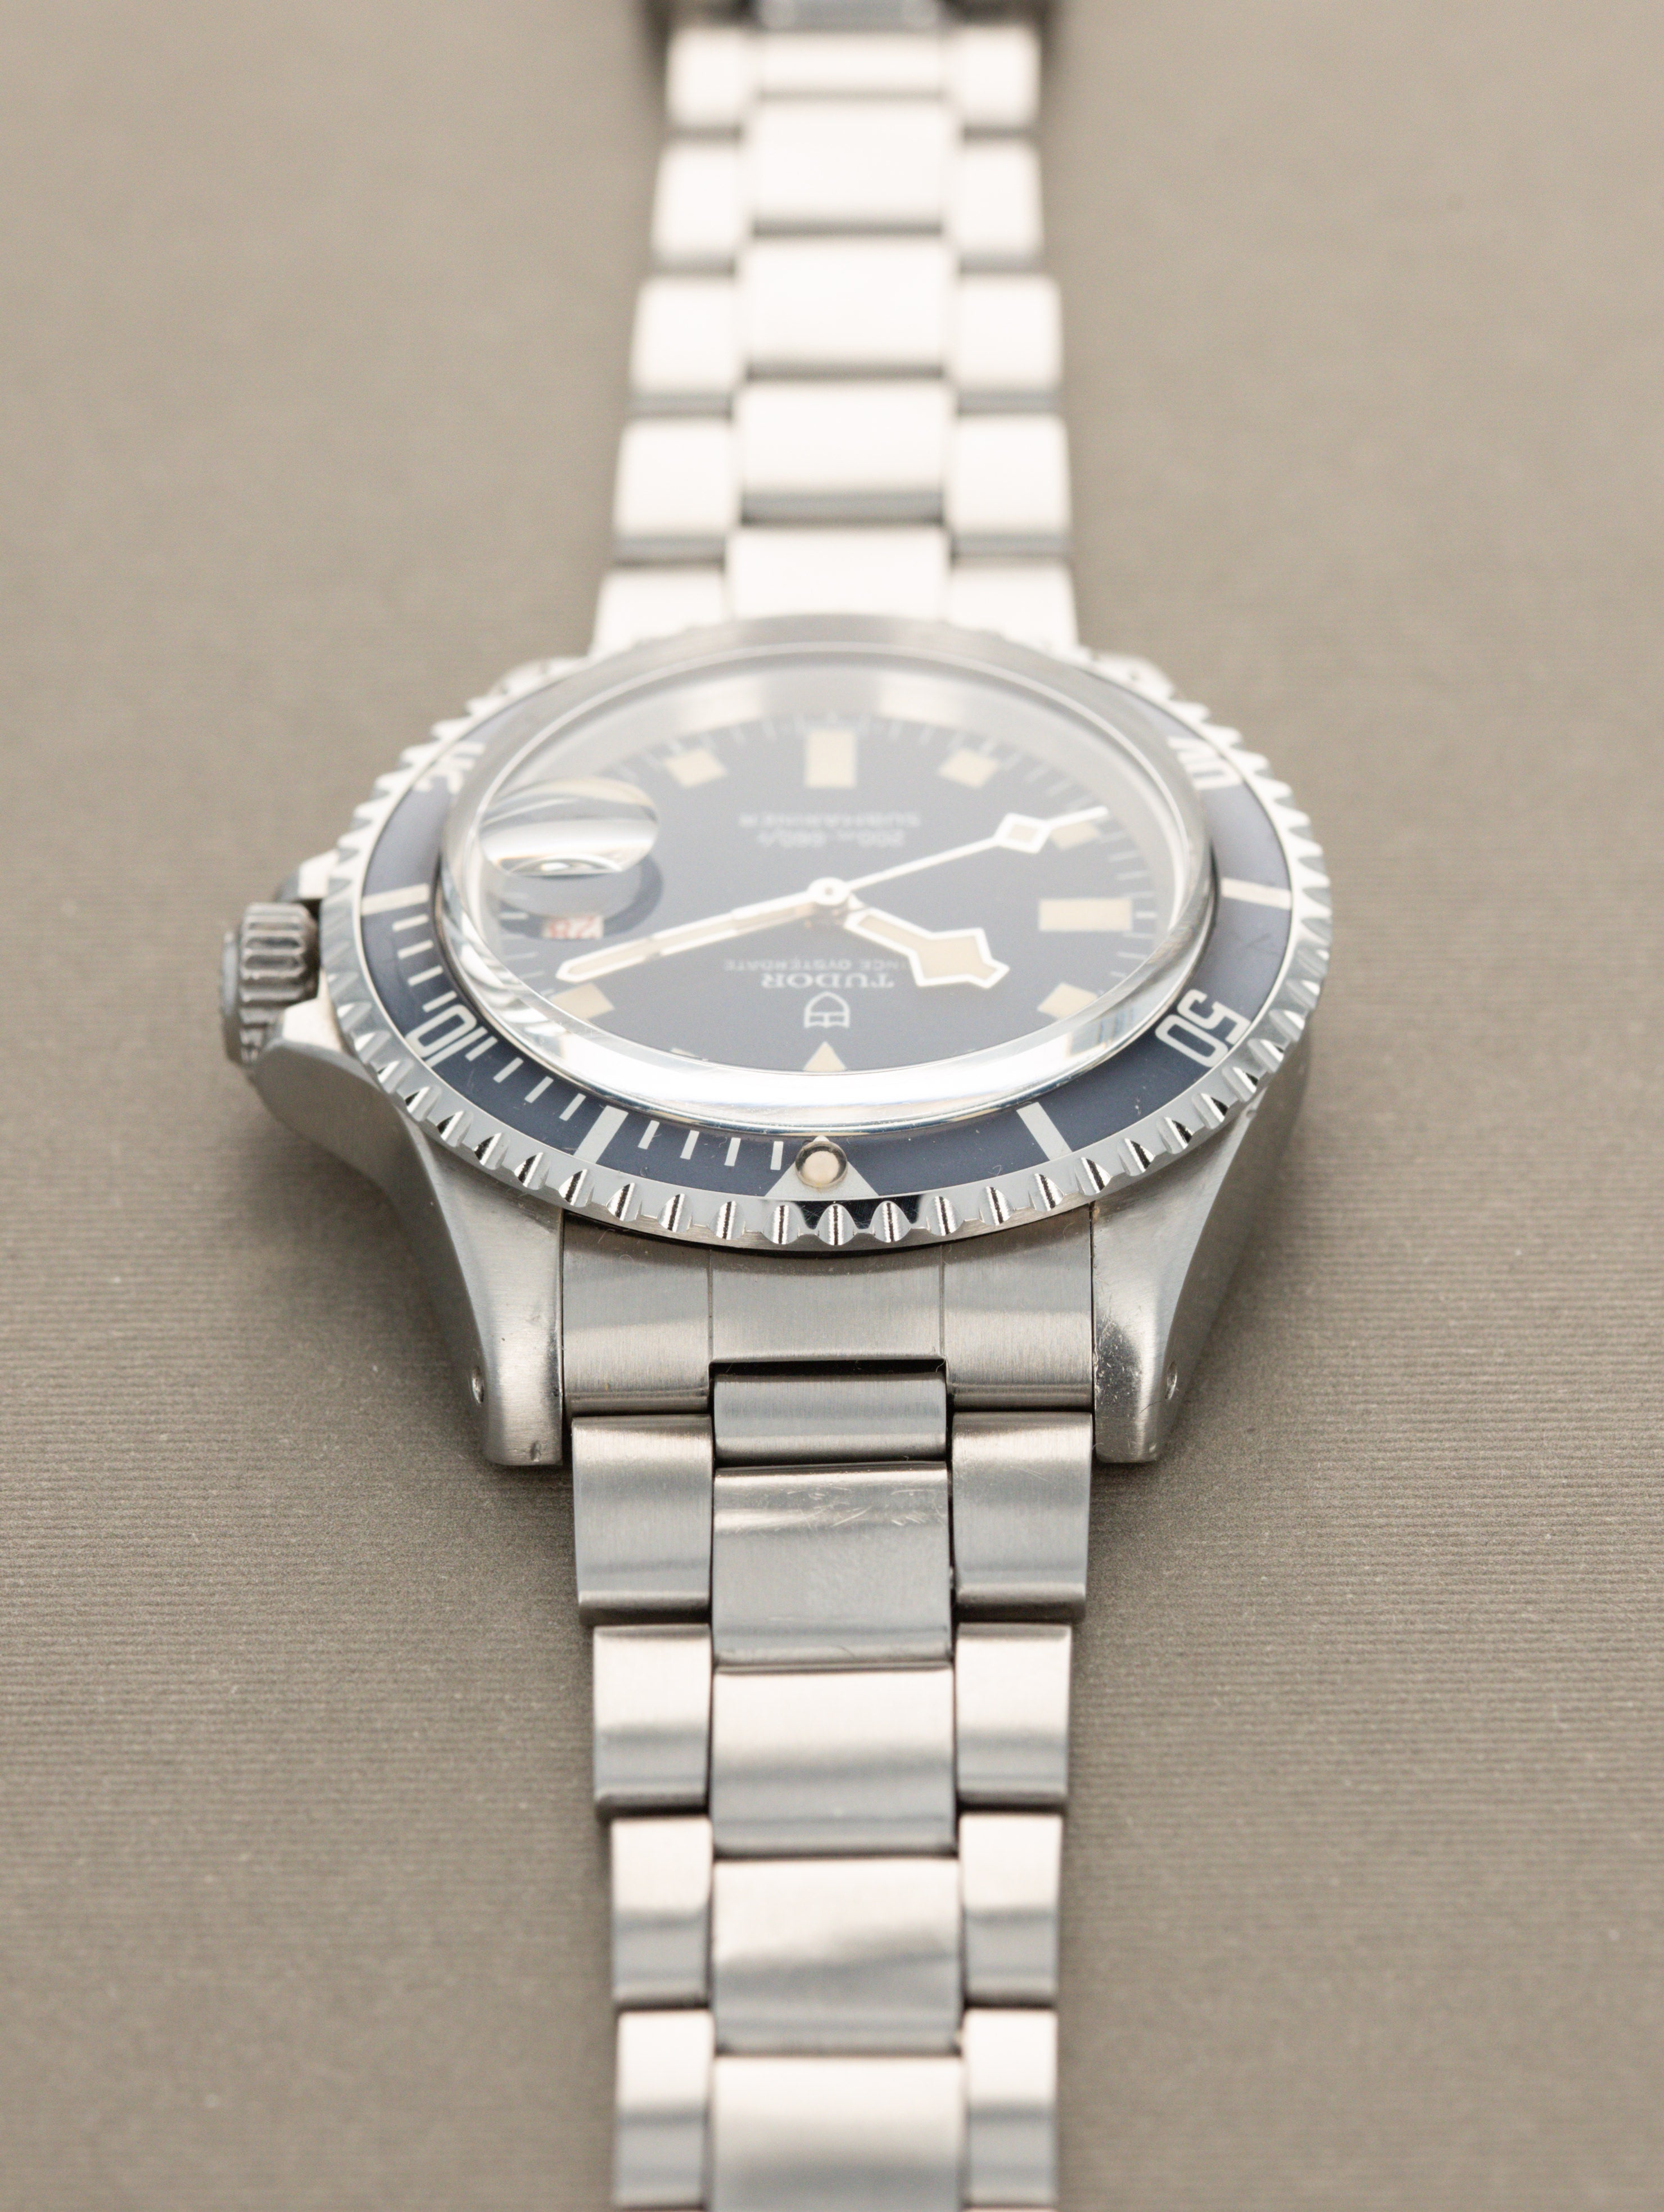 Tudor Submariner Ref. 7021/0 - Blue 'Snowflake Confetti Dial' With 'Roulette' Date